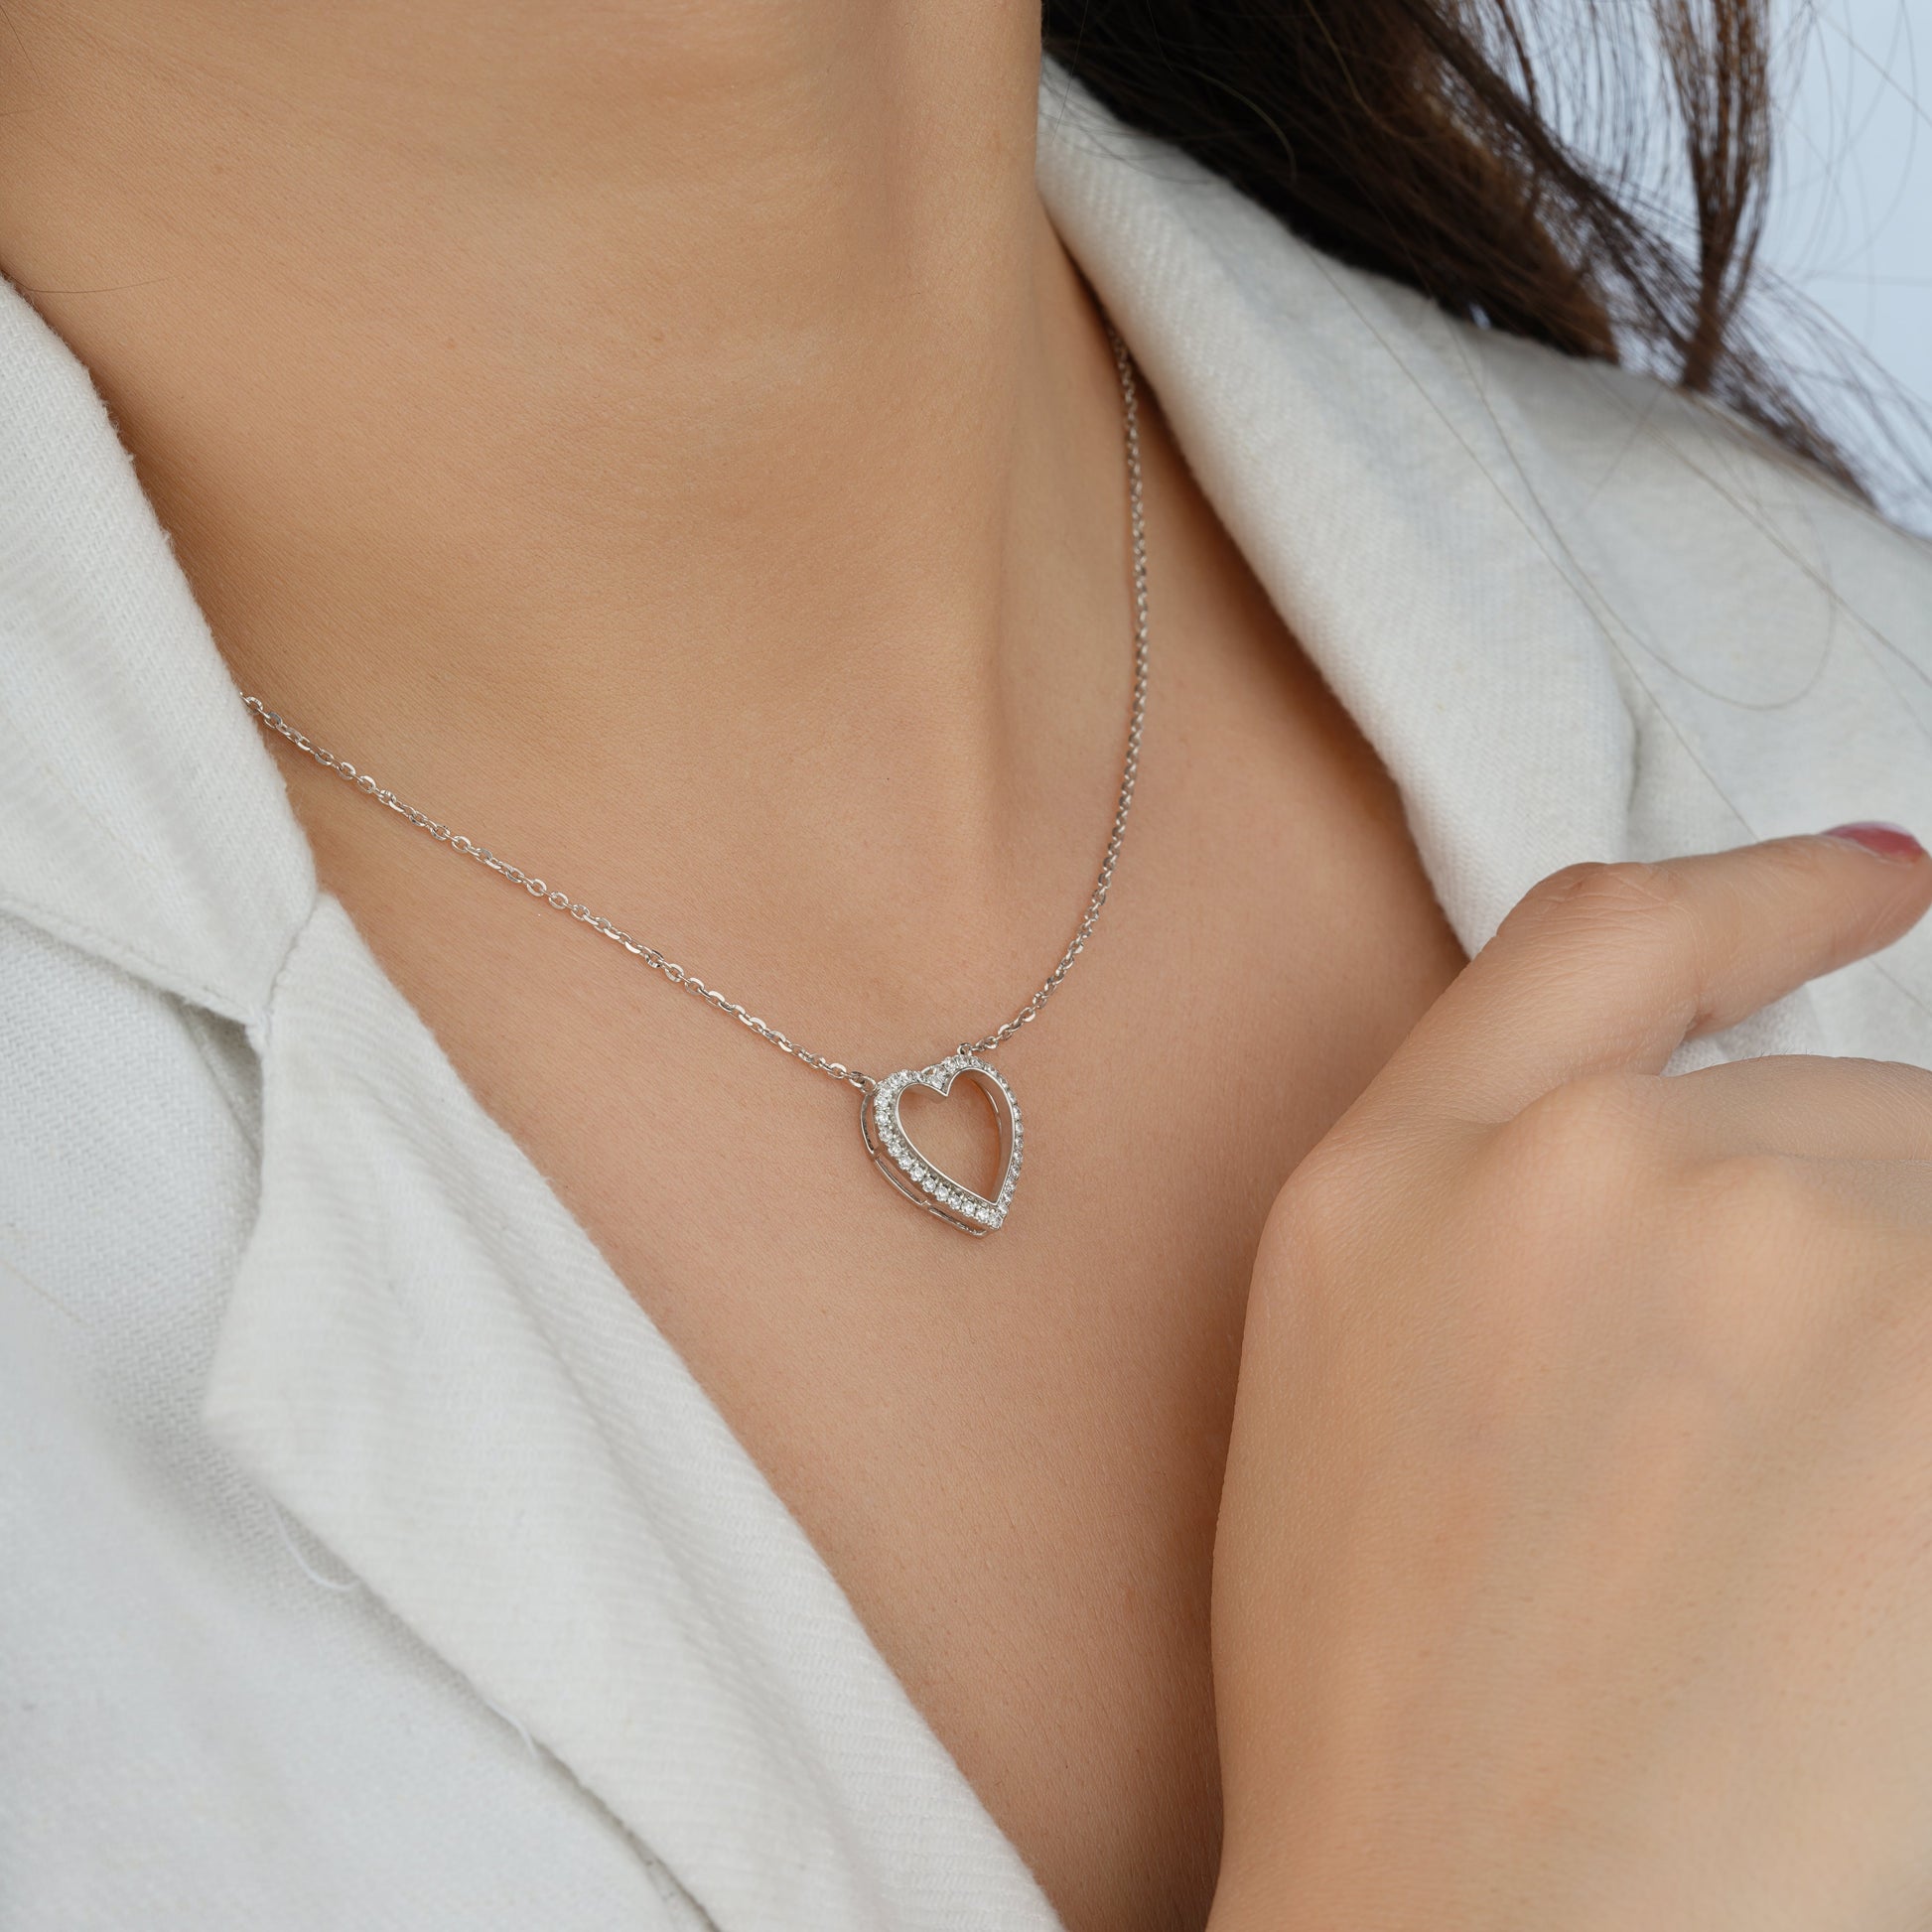 heart shaped necklace